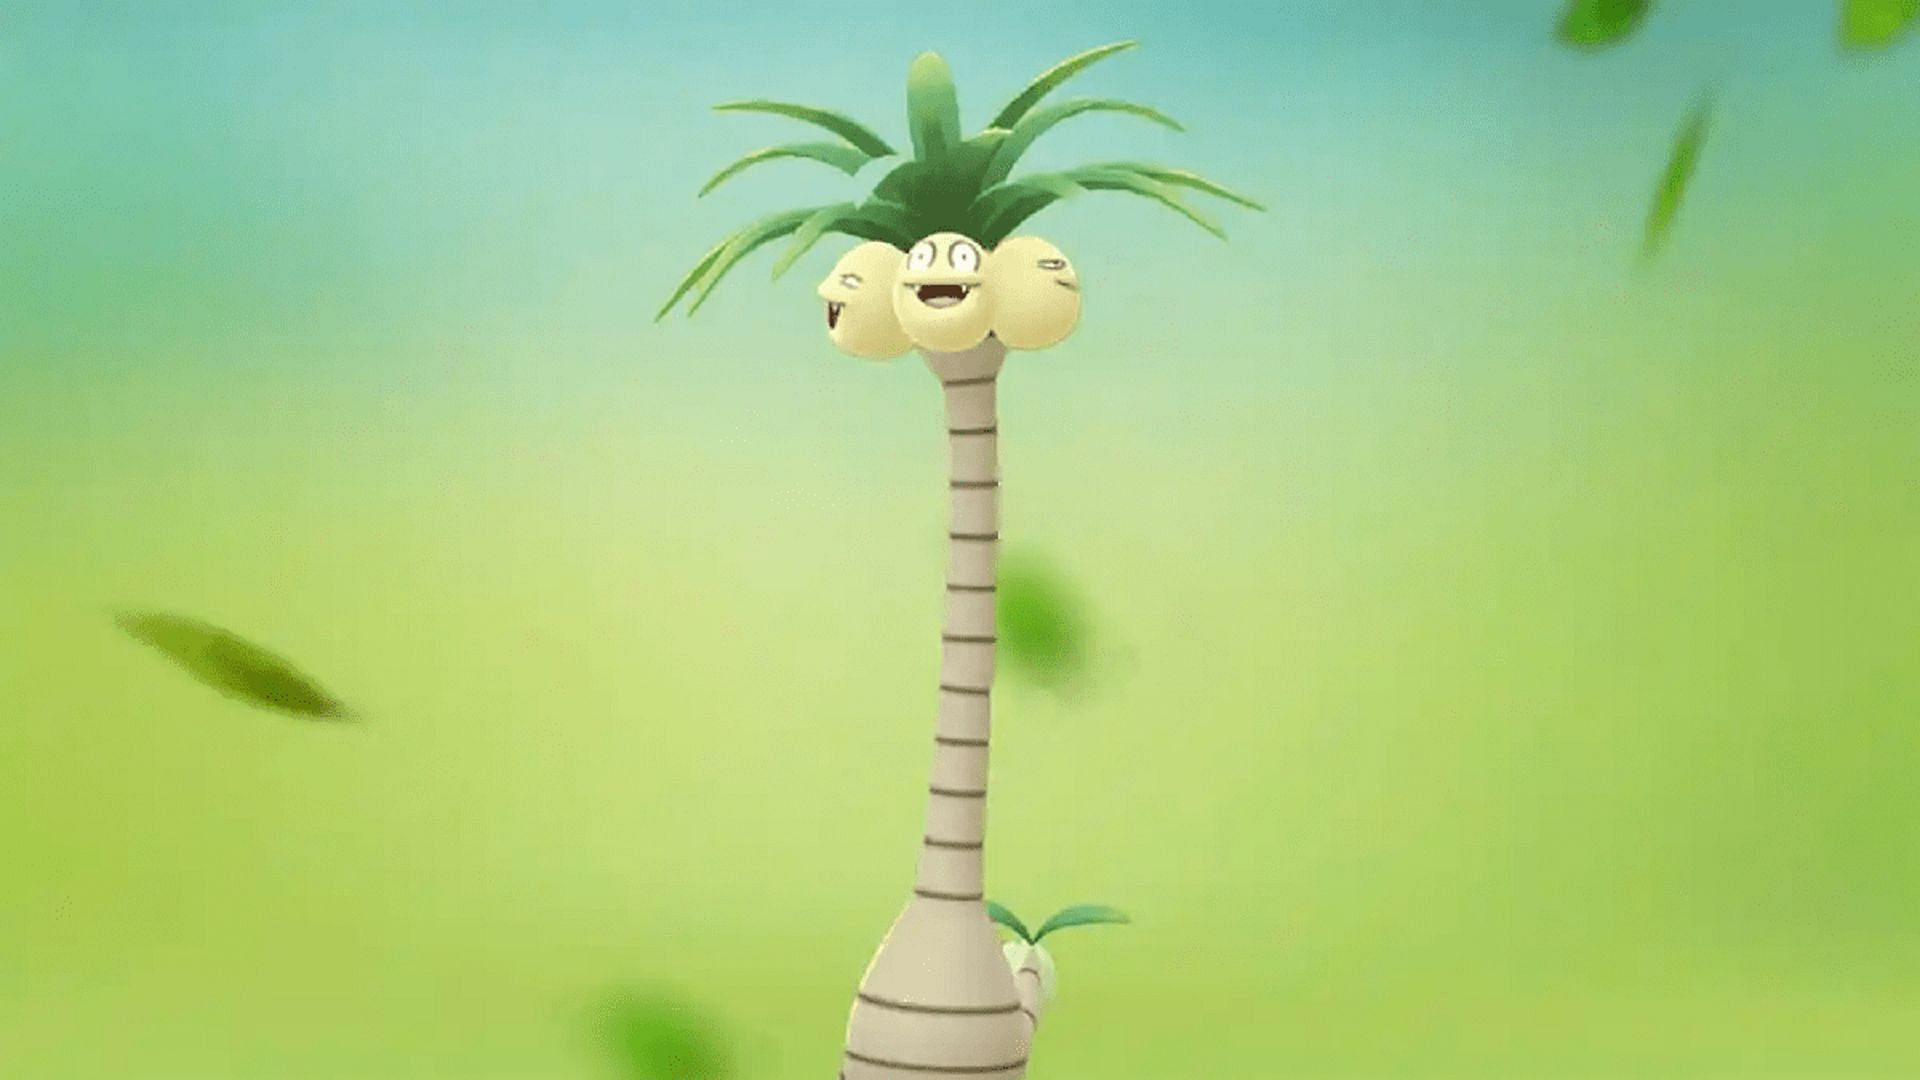 GO Alolan Exeggutor guide (March 2023): Best counters, weaknesses, and more